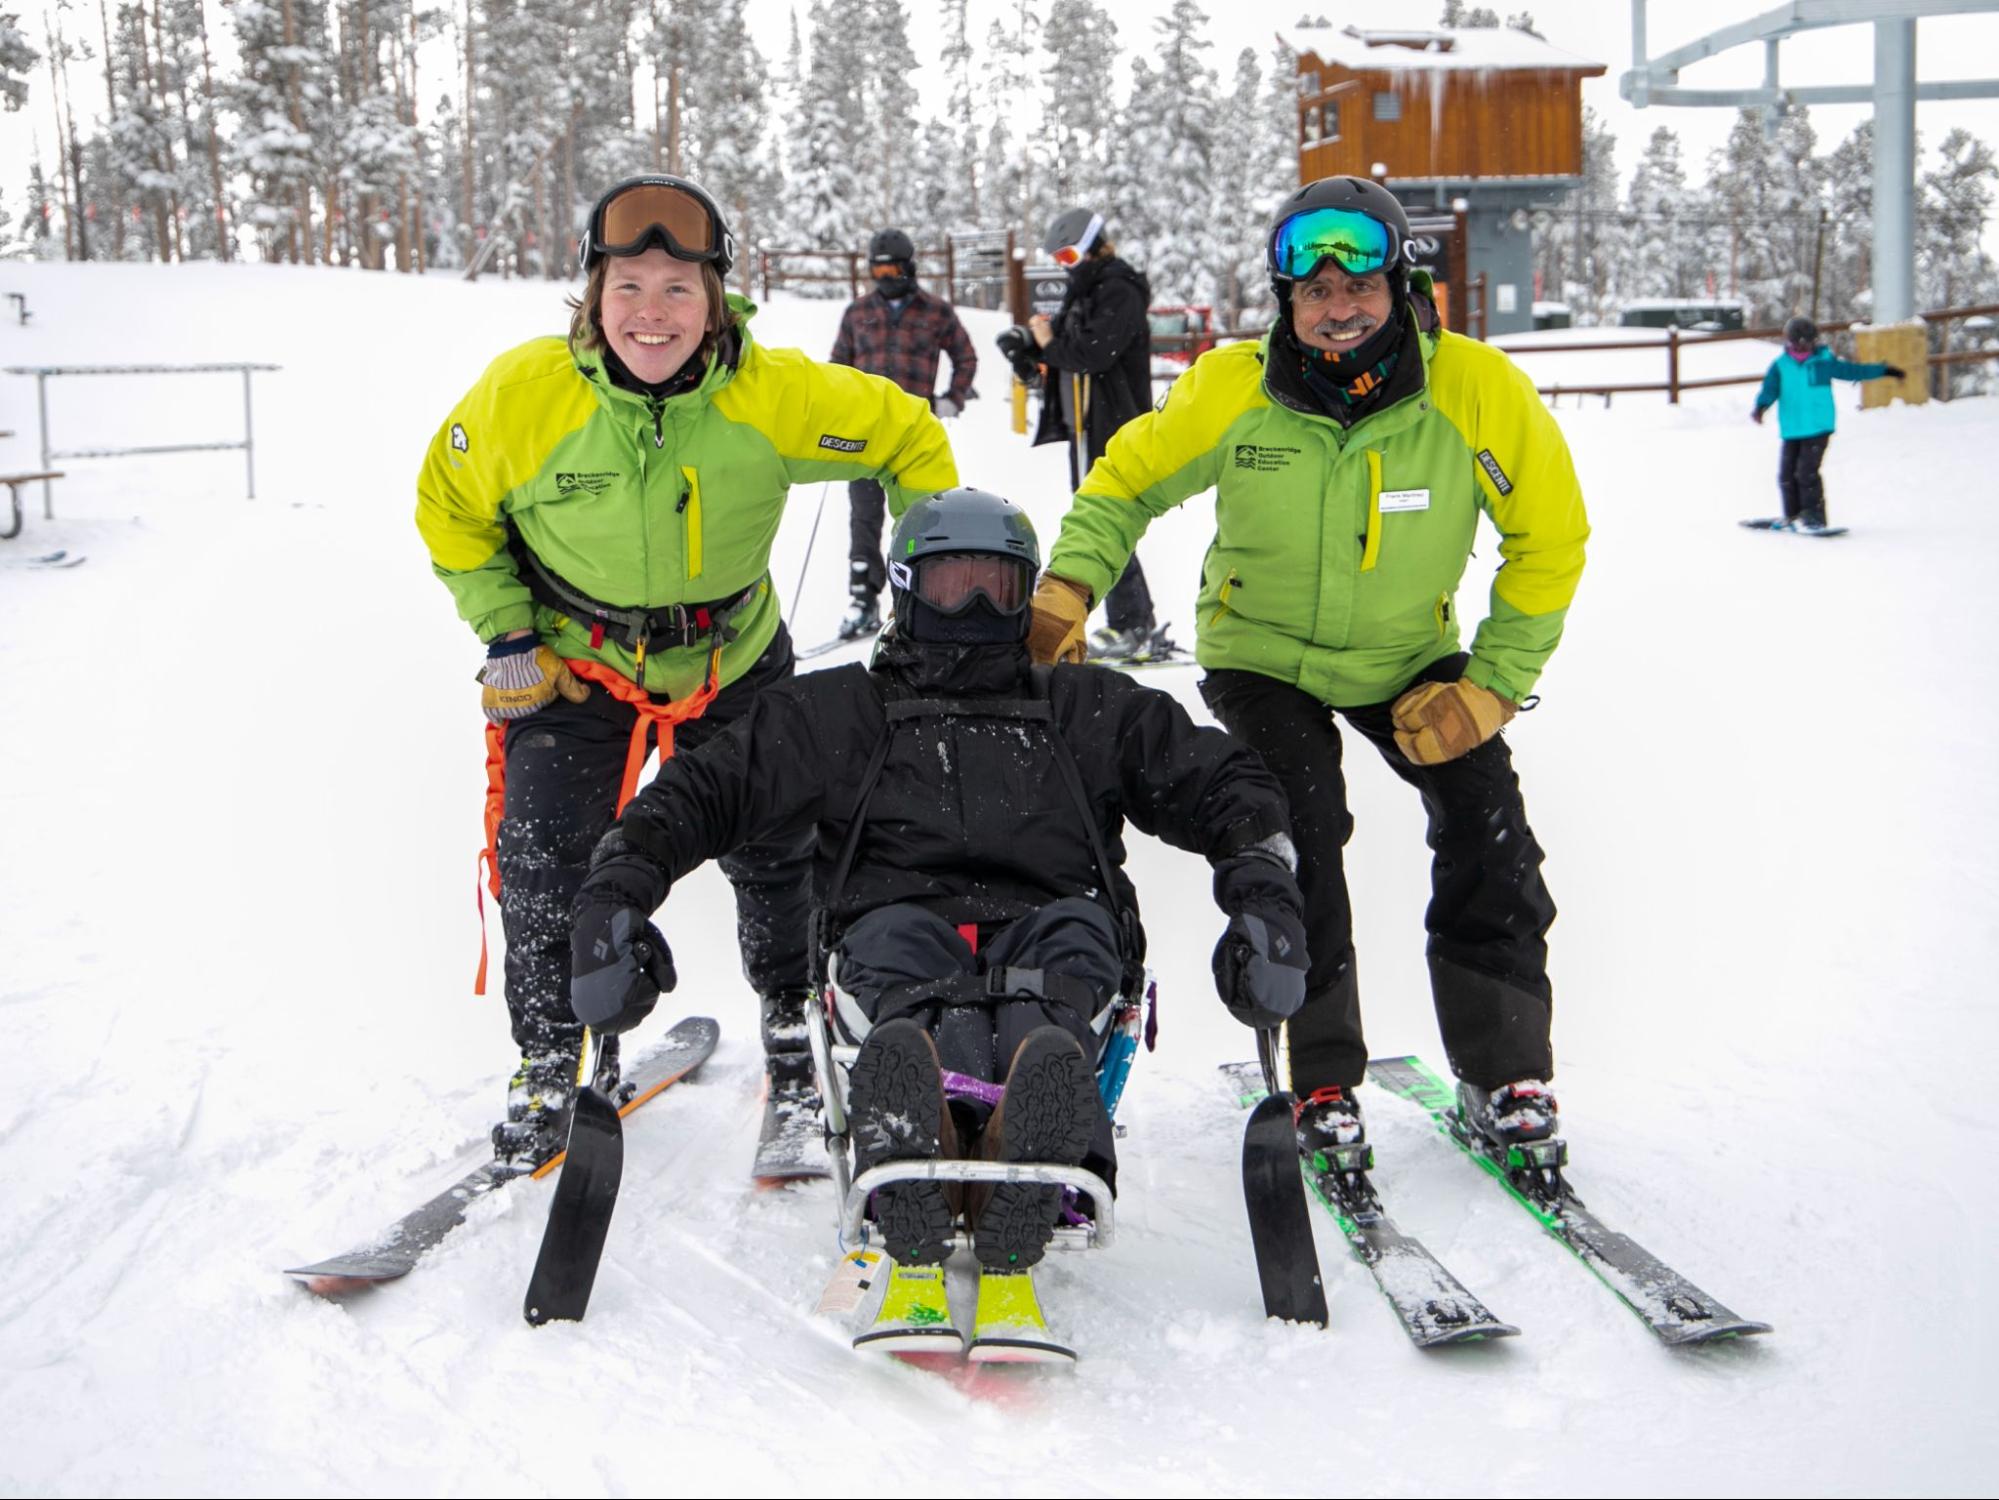 Frank and Tyler with a student from Adaptive Adventures.